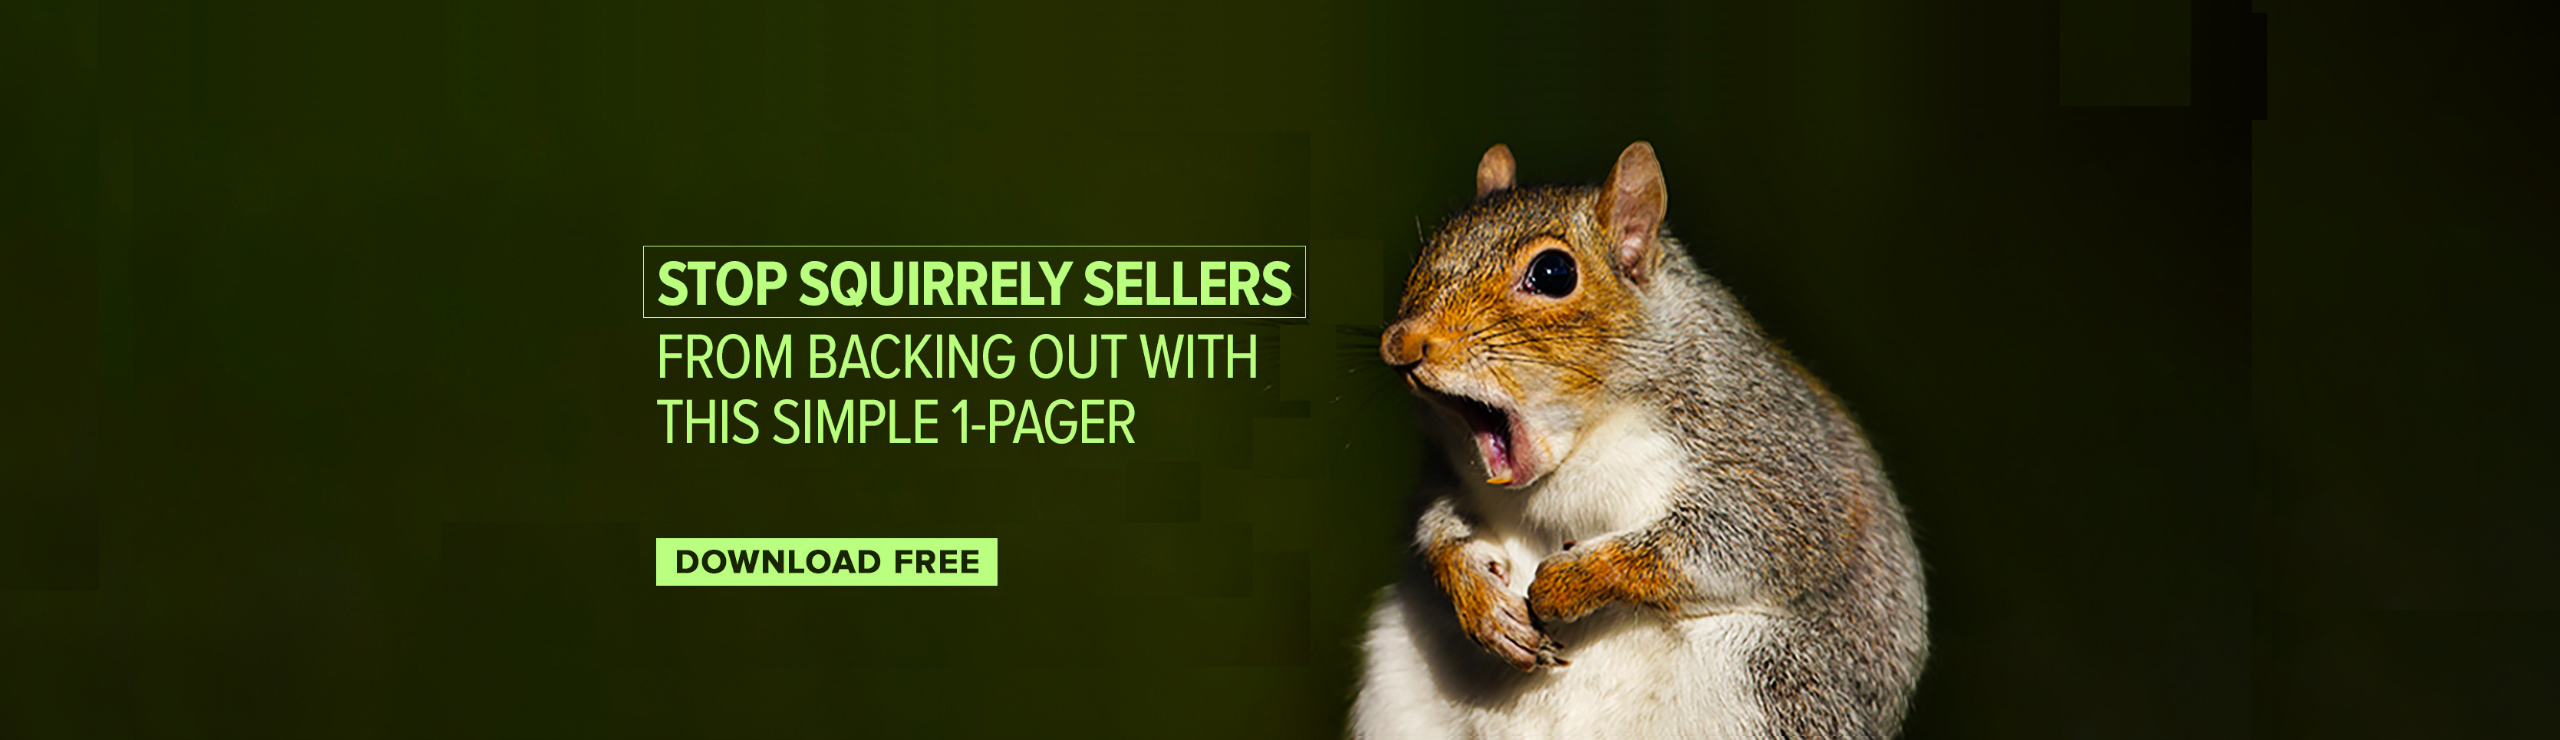 Free Download Stop Squirrely Sellers from Backing Out with this Simple 1-Pager